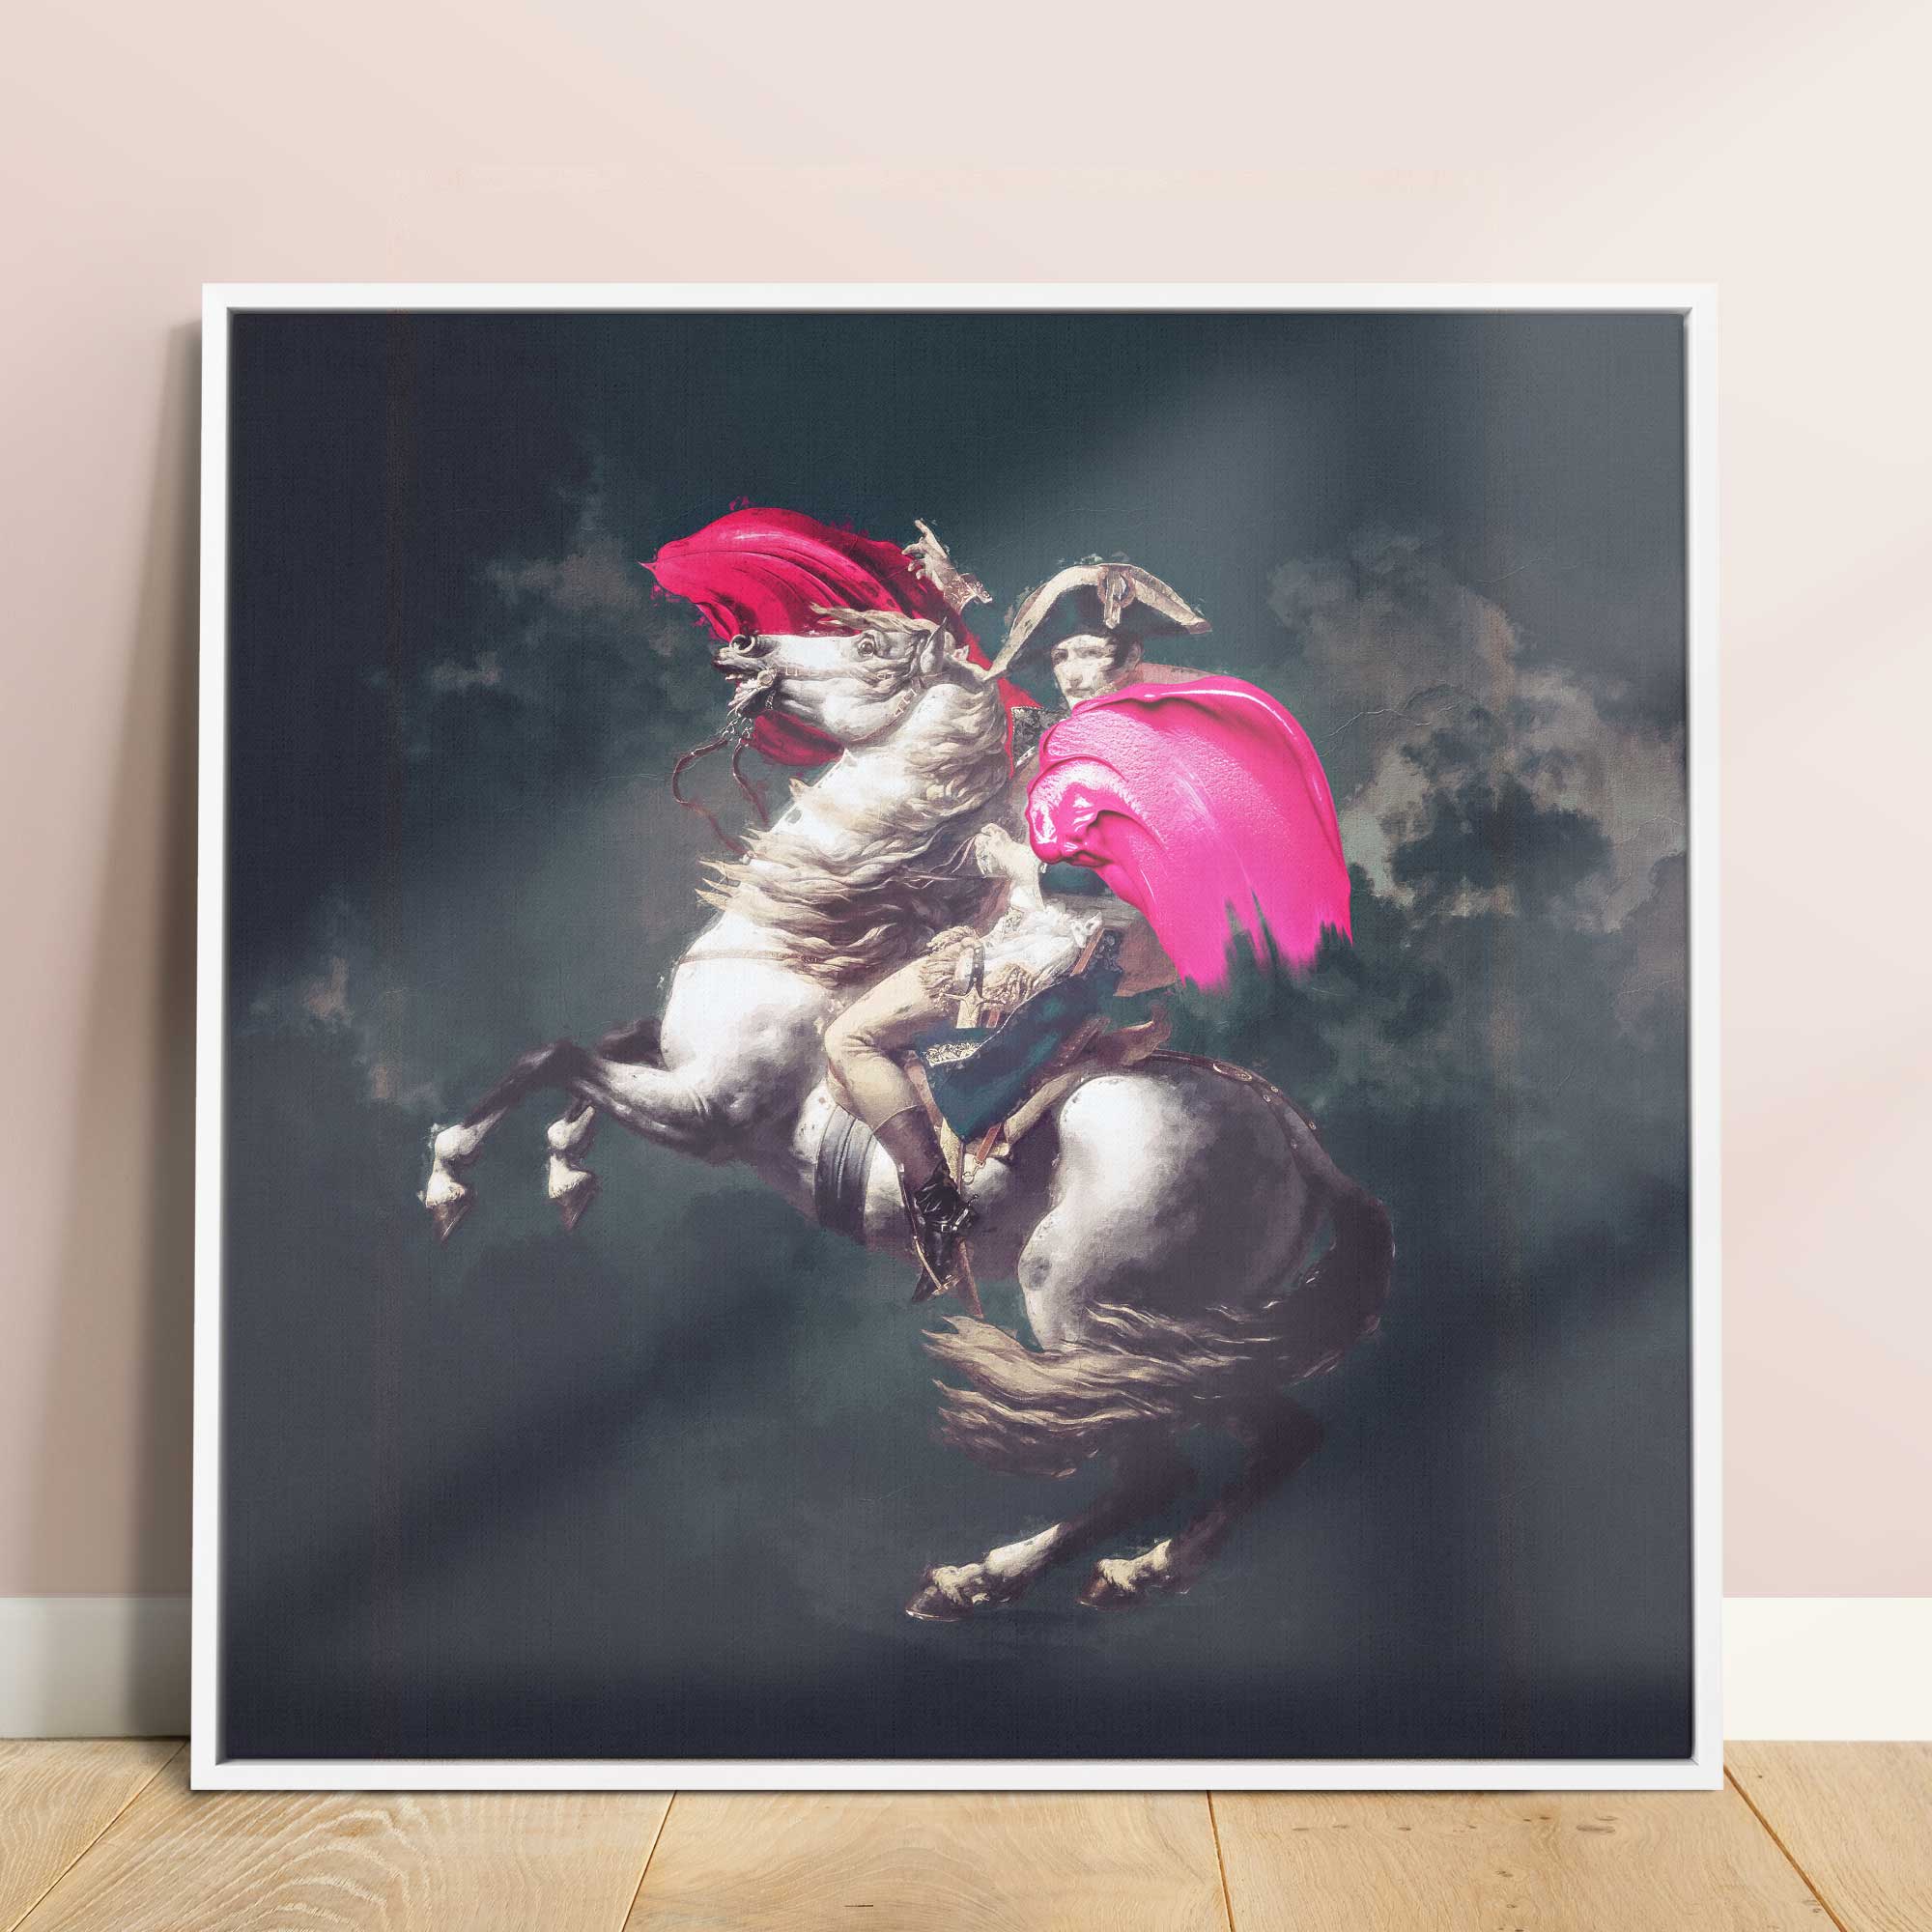 IN THE PINK OF CONQUEST PRINT